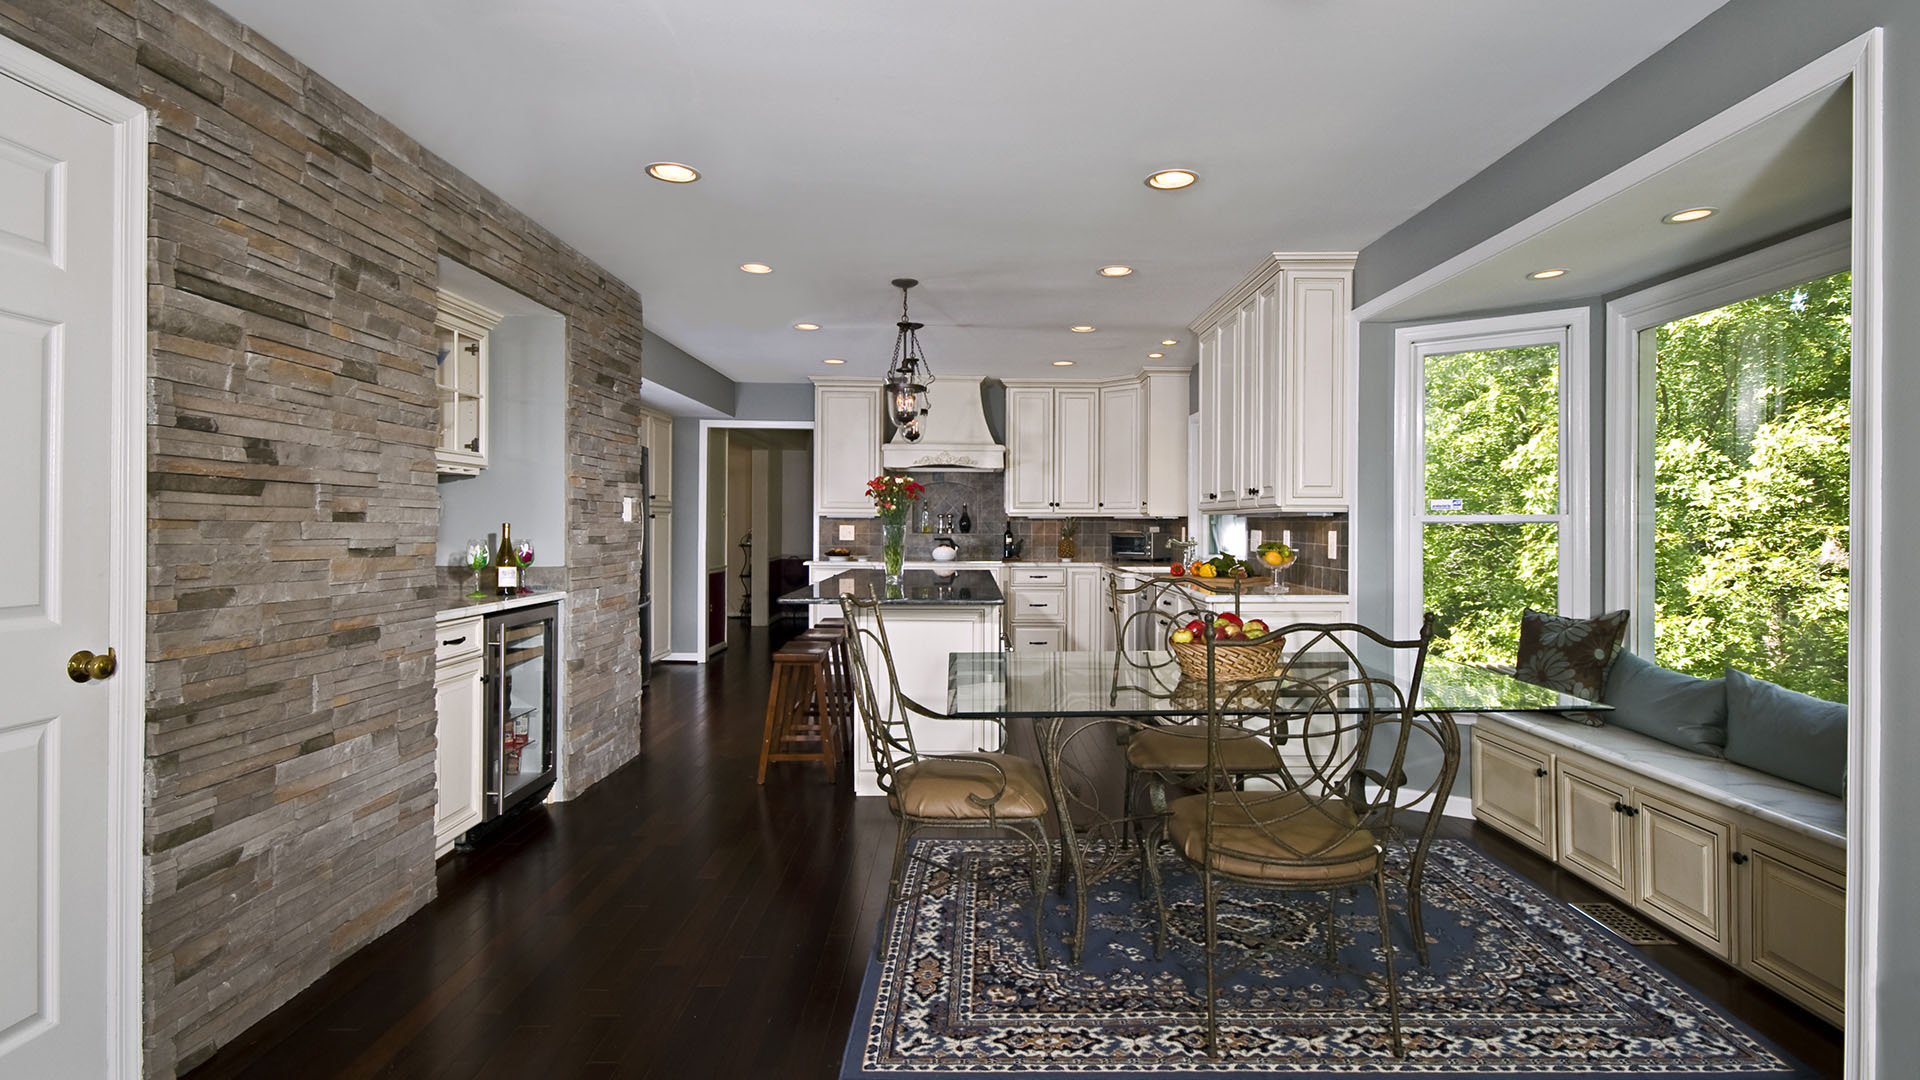 2012 NARI Capital CotY, Honorable Mention Award Winner, Residential Kitchen $50,000 to $100,000